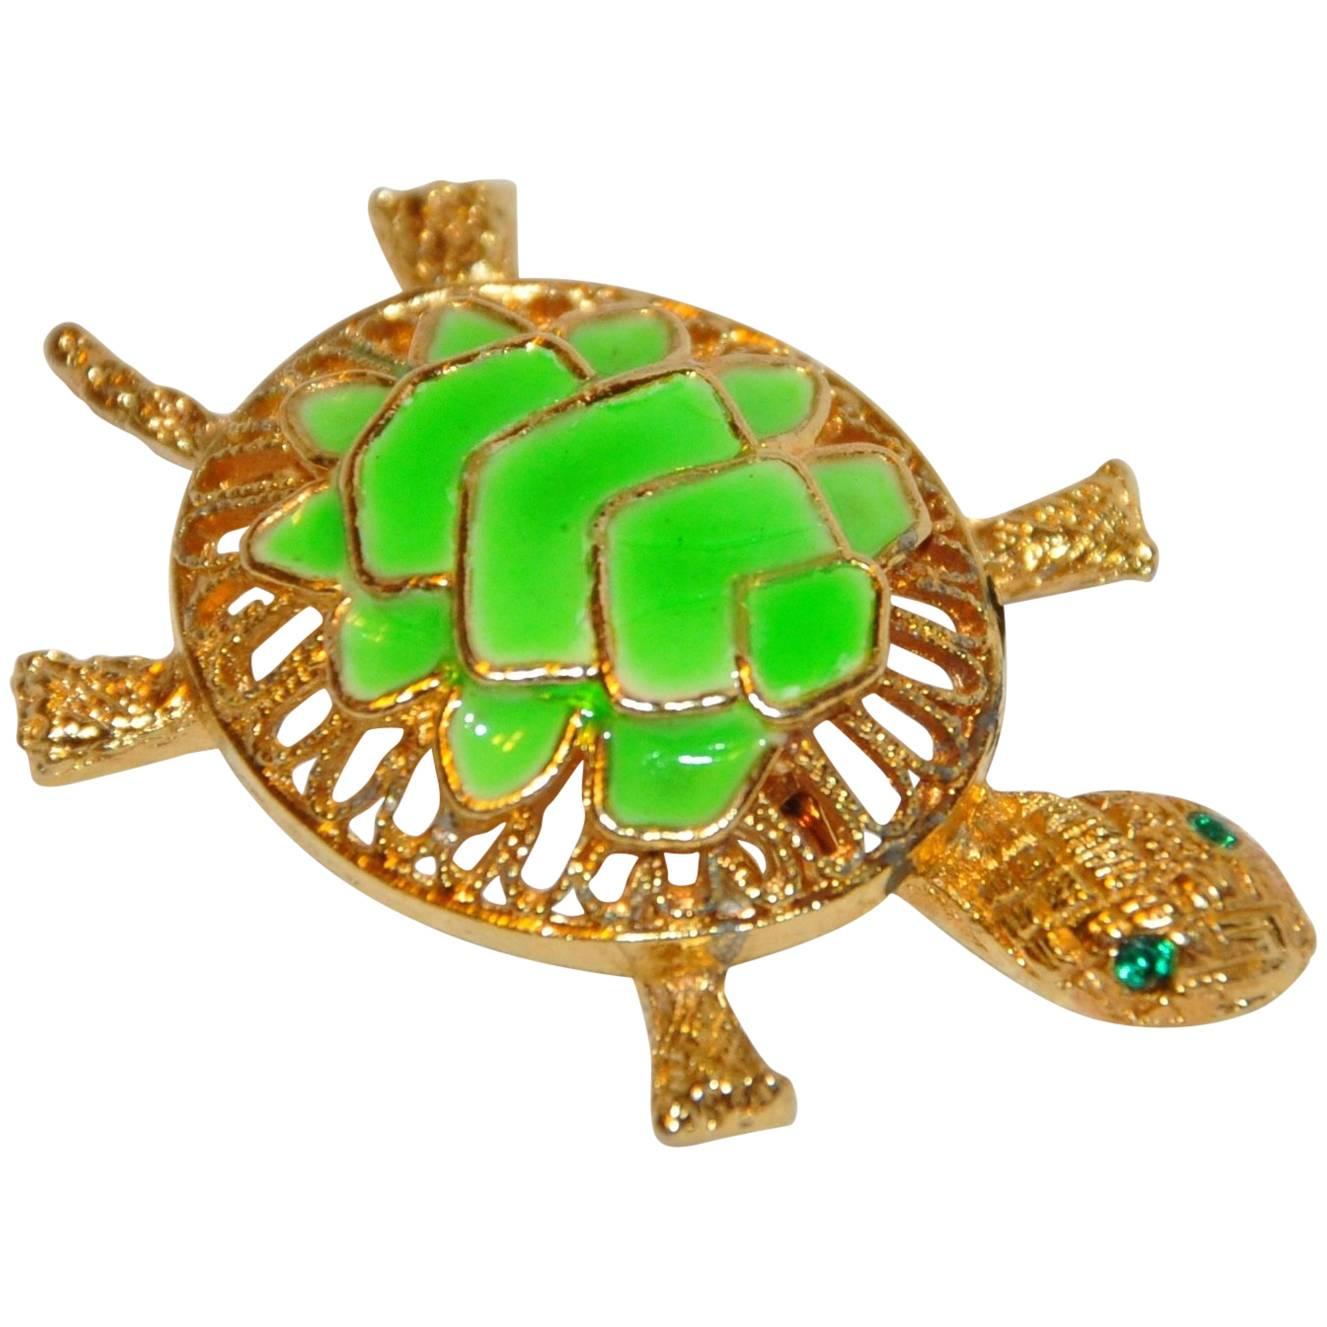 Whimsical Gilded Gold Hardware with Enamel "Turtle" Brooch